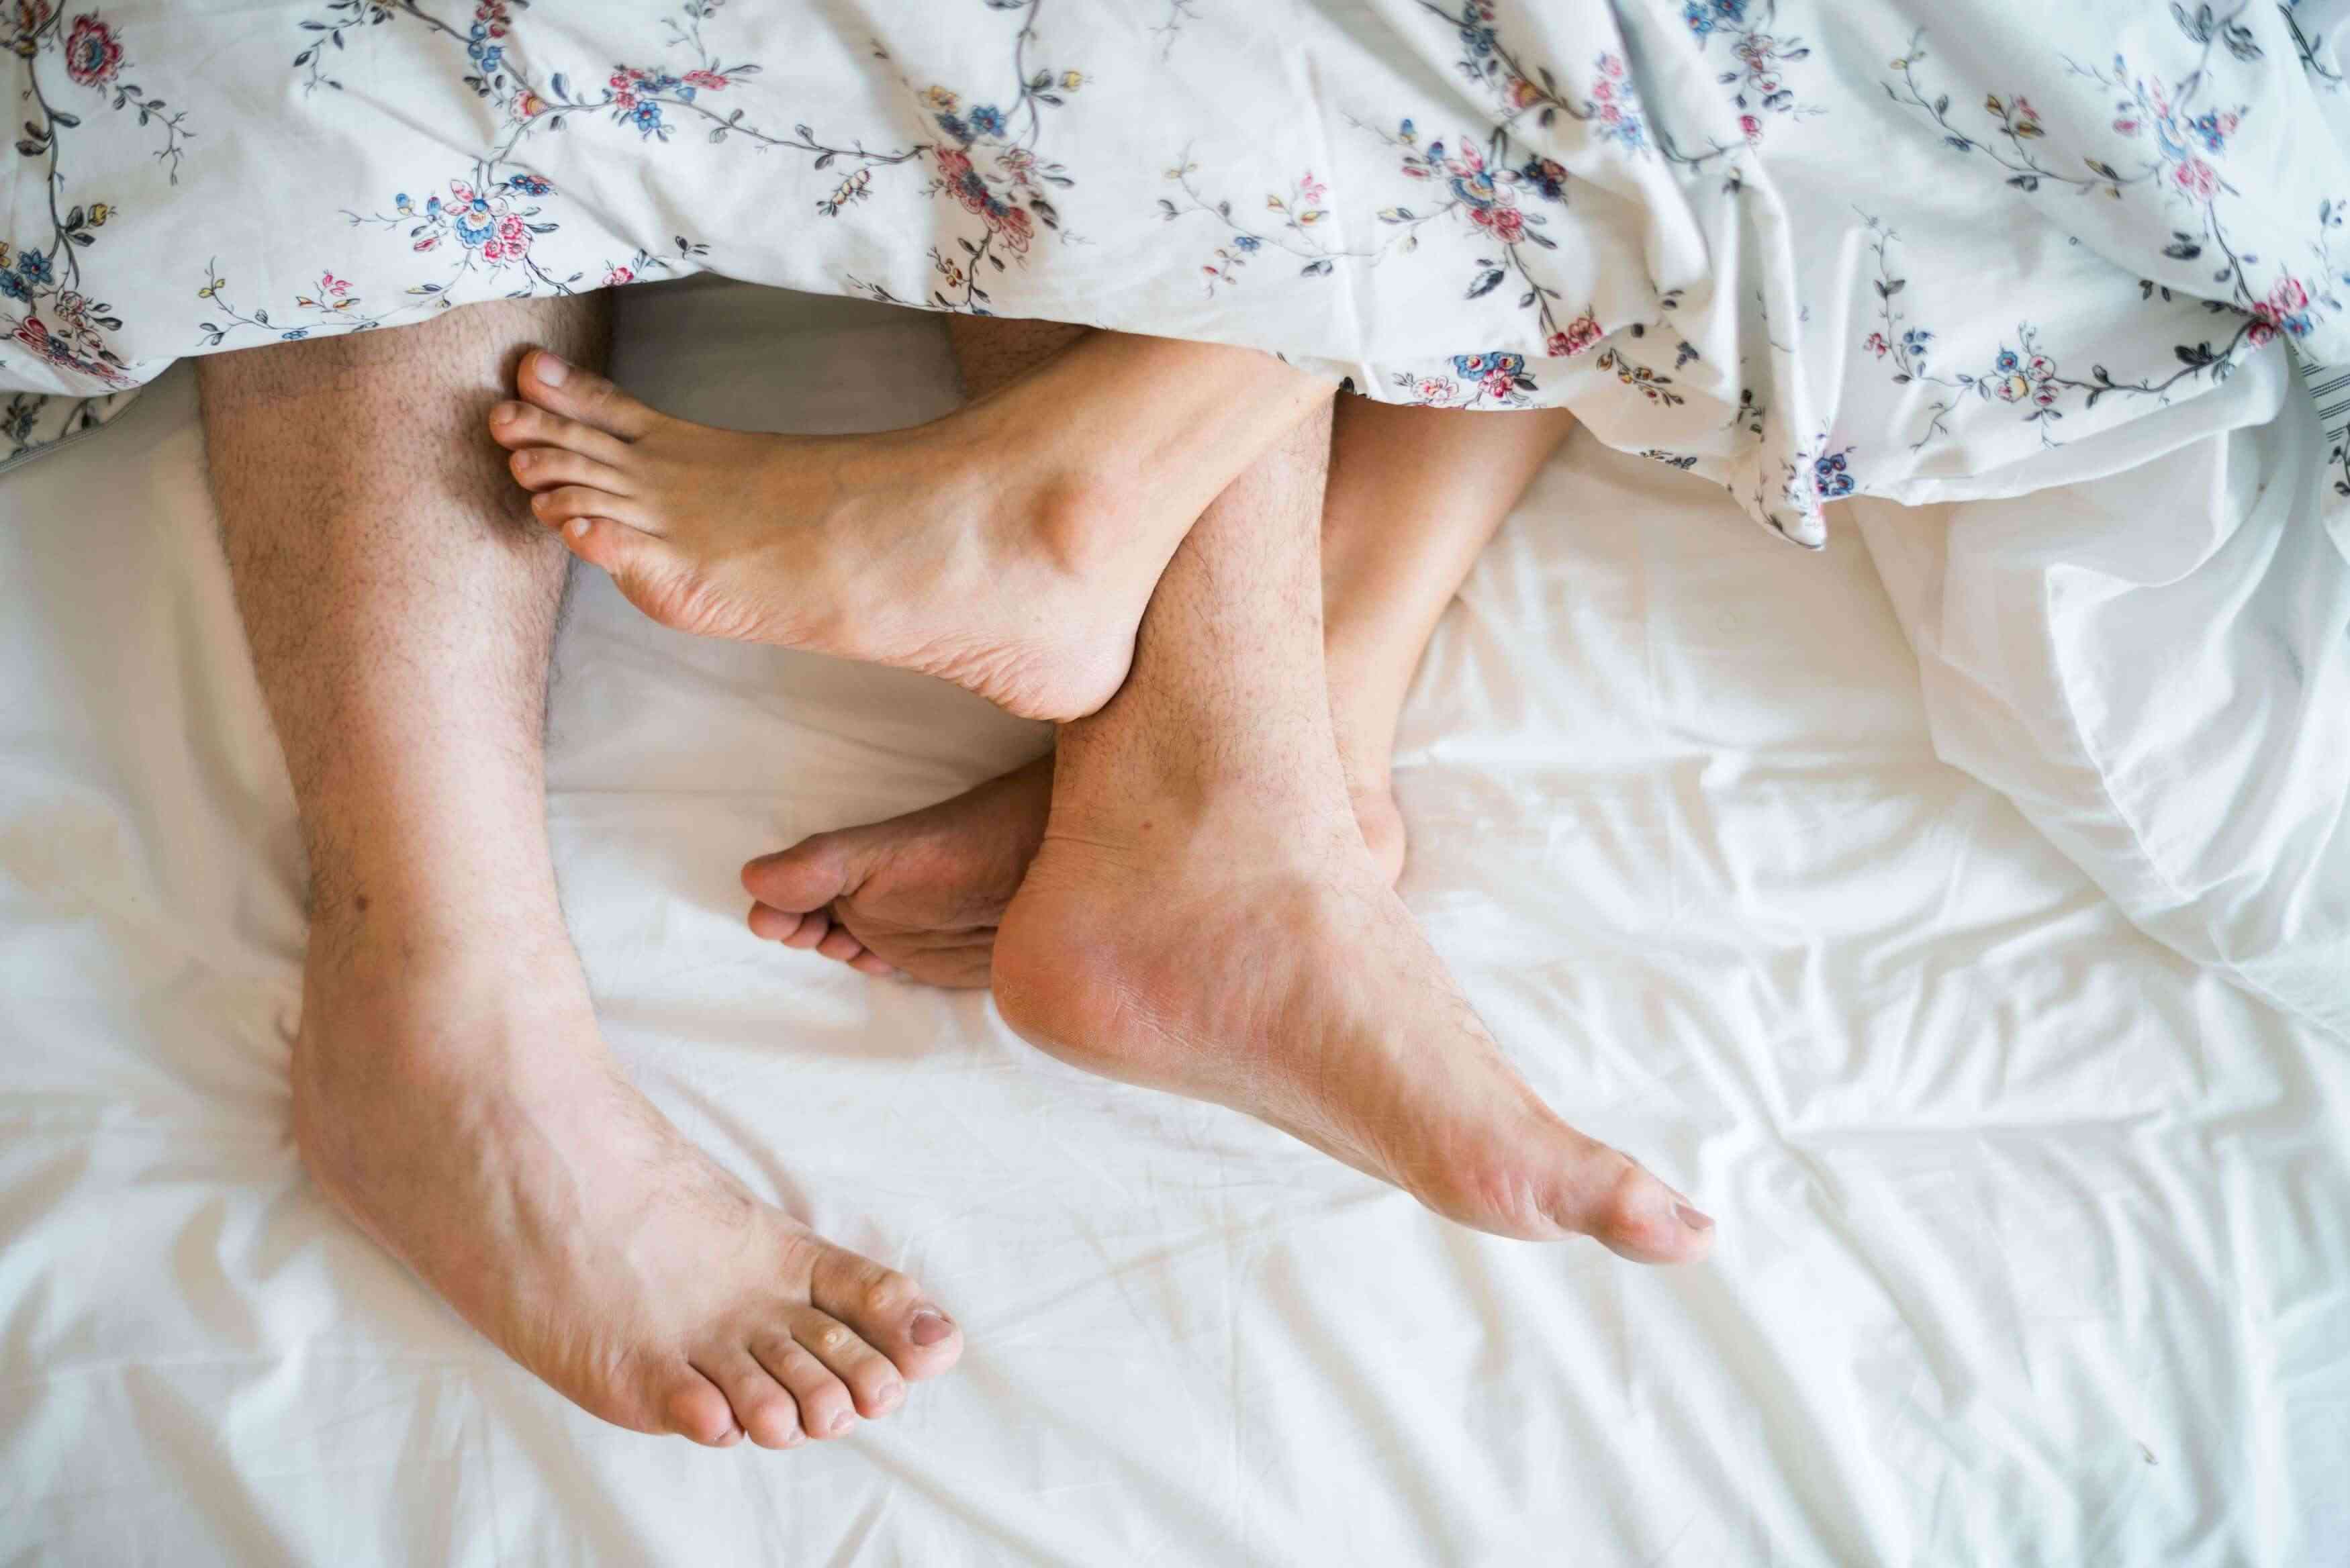 10 Fun Sex Ideas That Can Bring Passion Back To The Bedroom Regain